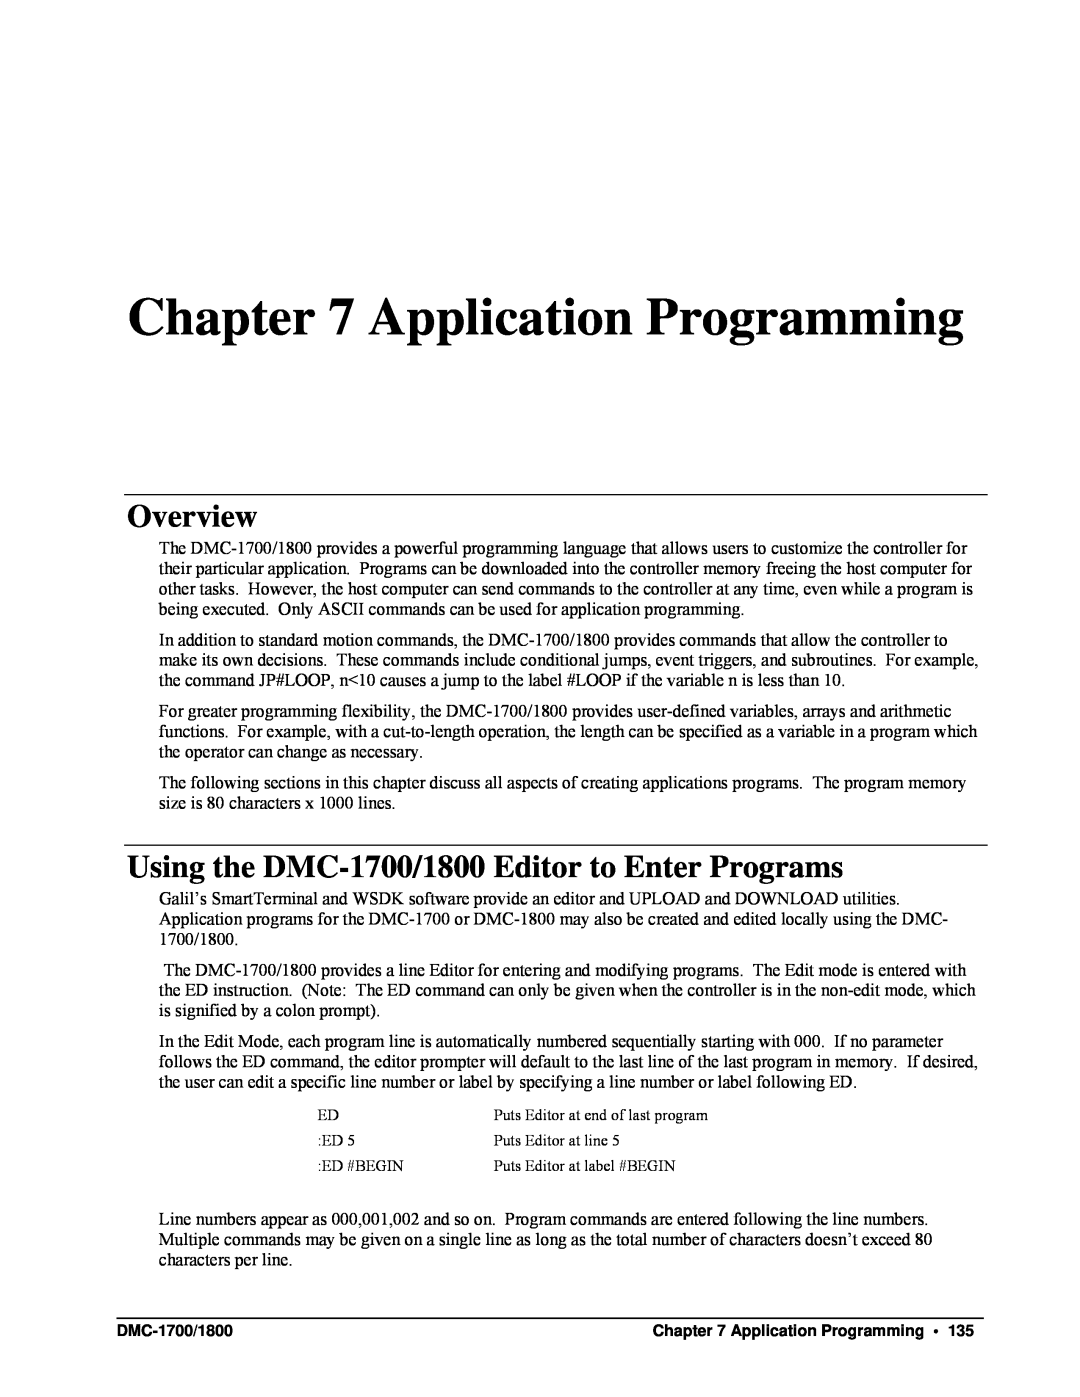 Galil DMC-1800 user manual Application Programming, Overview, Using the DMC-1700/1800Editor to Enter Programs 